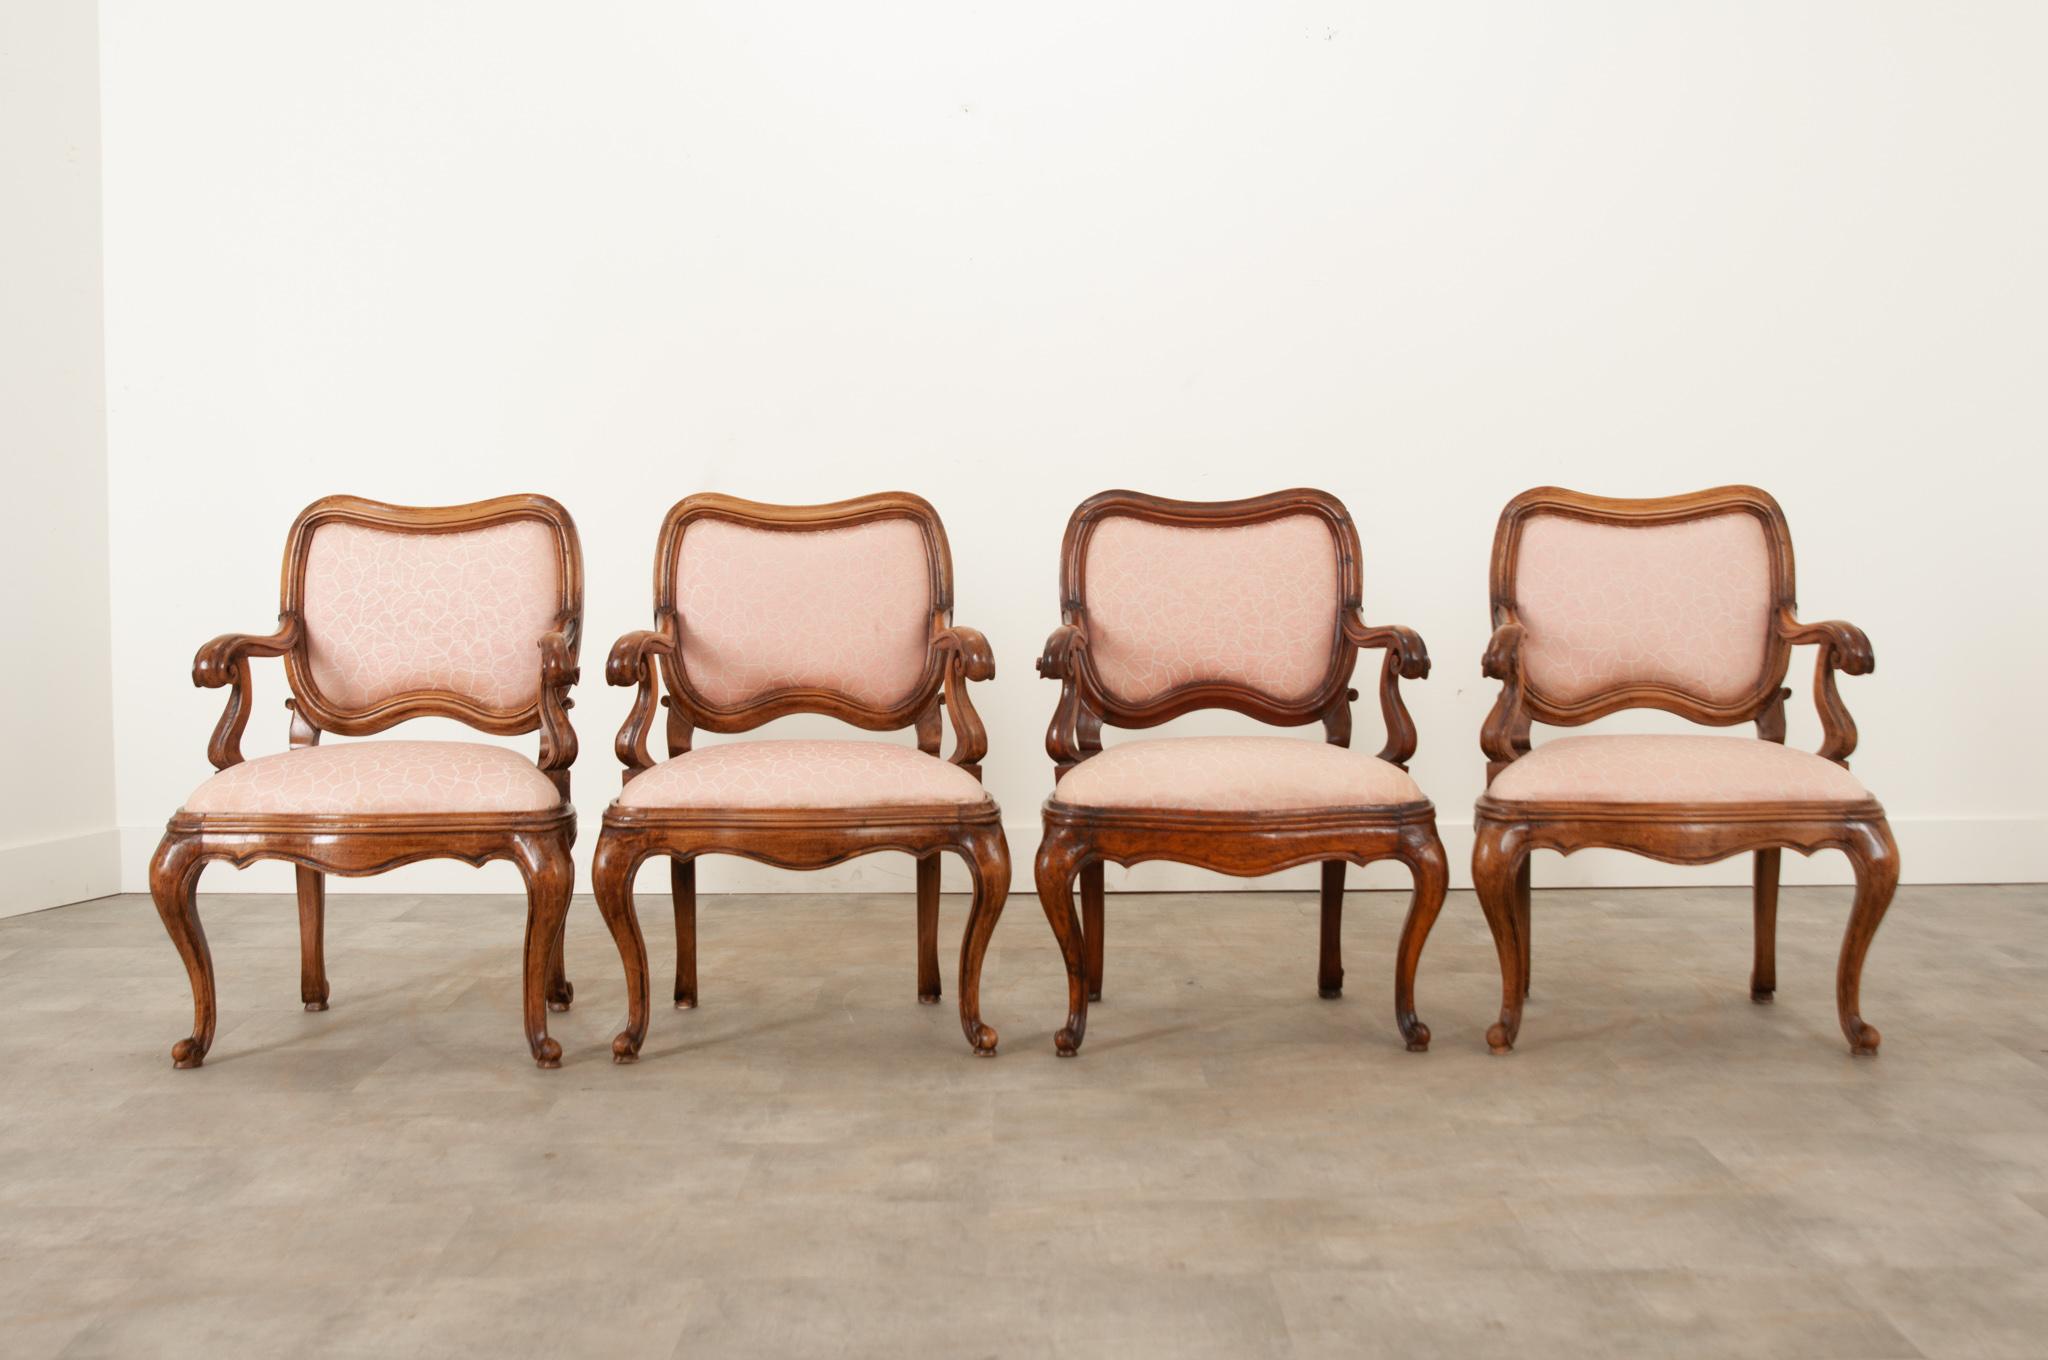 Set of 4 Vintage Italian Rococo Arm Chairs In Good Condition For Sale In Baton Rouge, LA